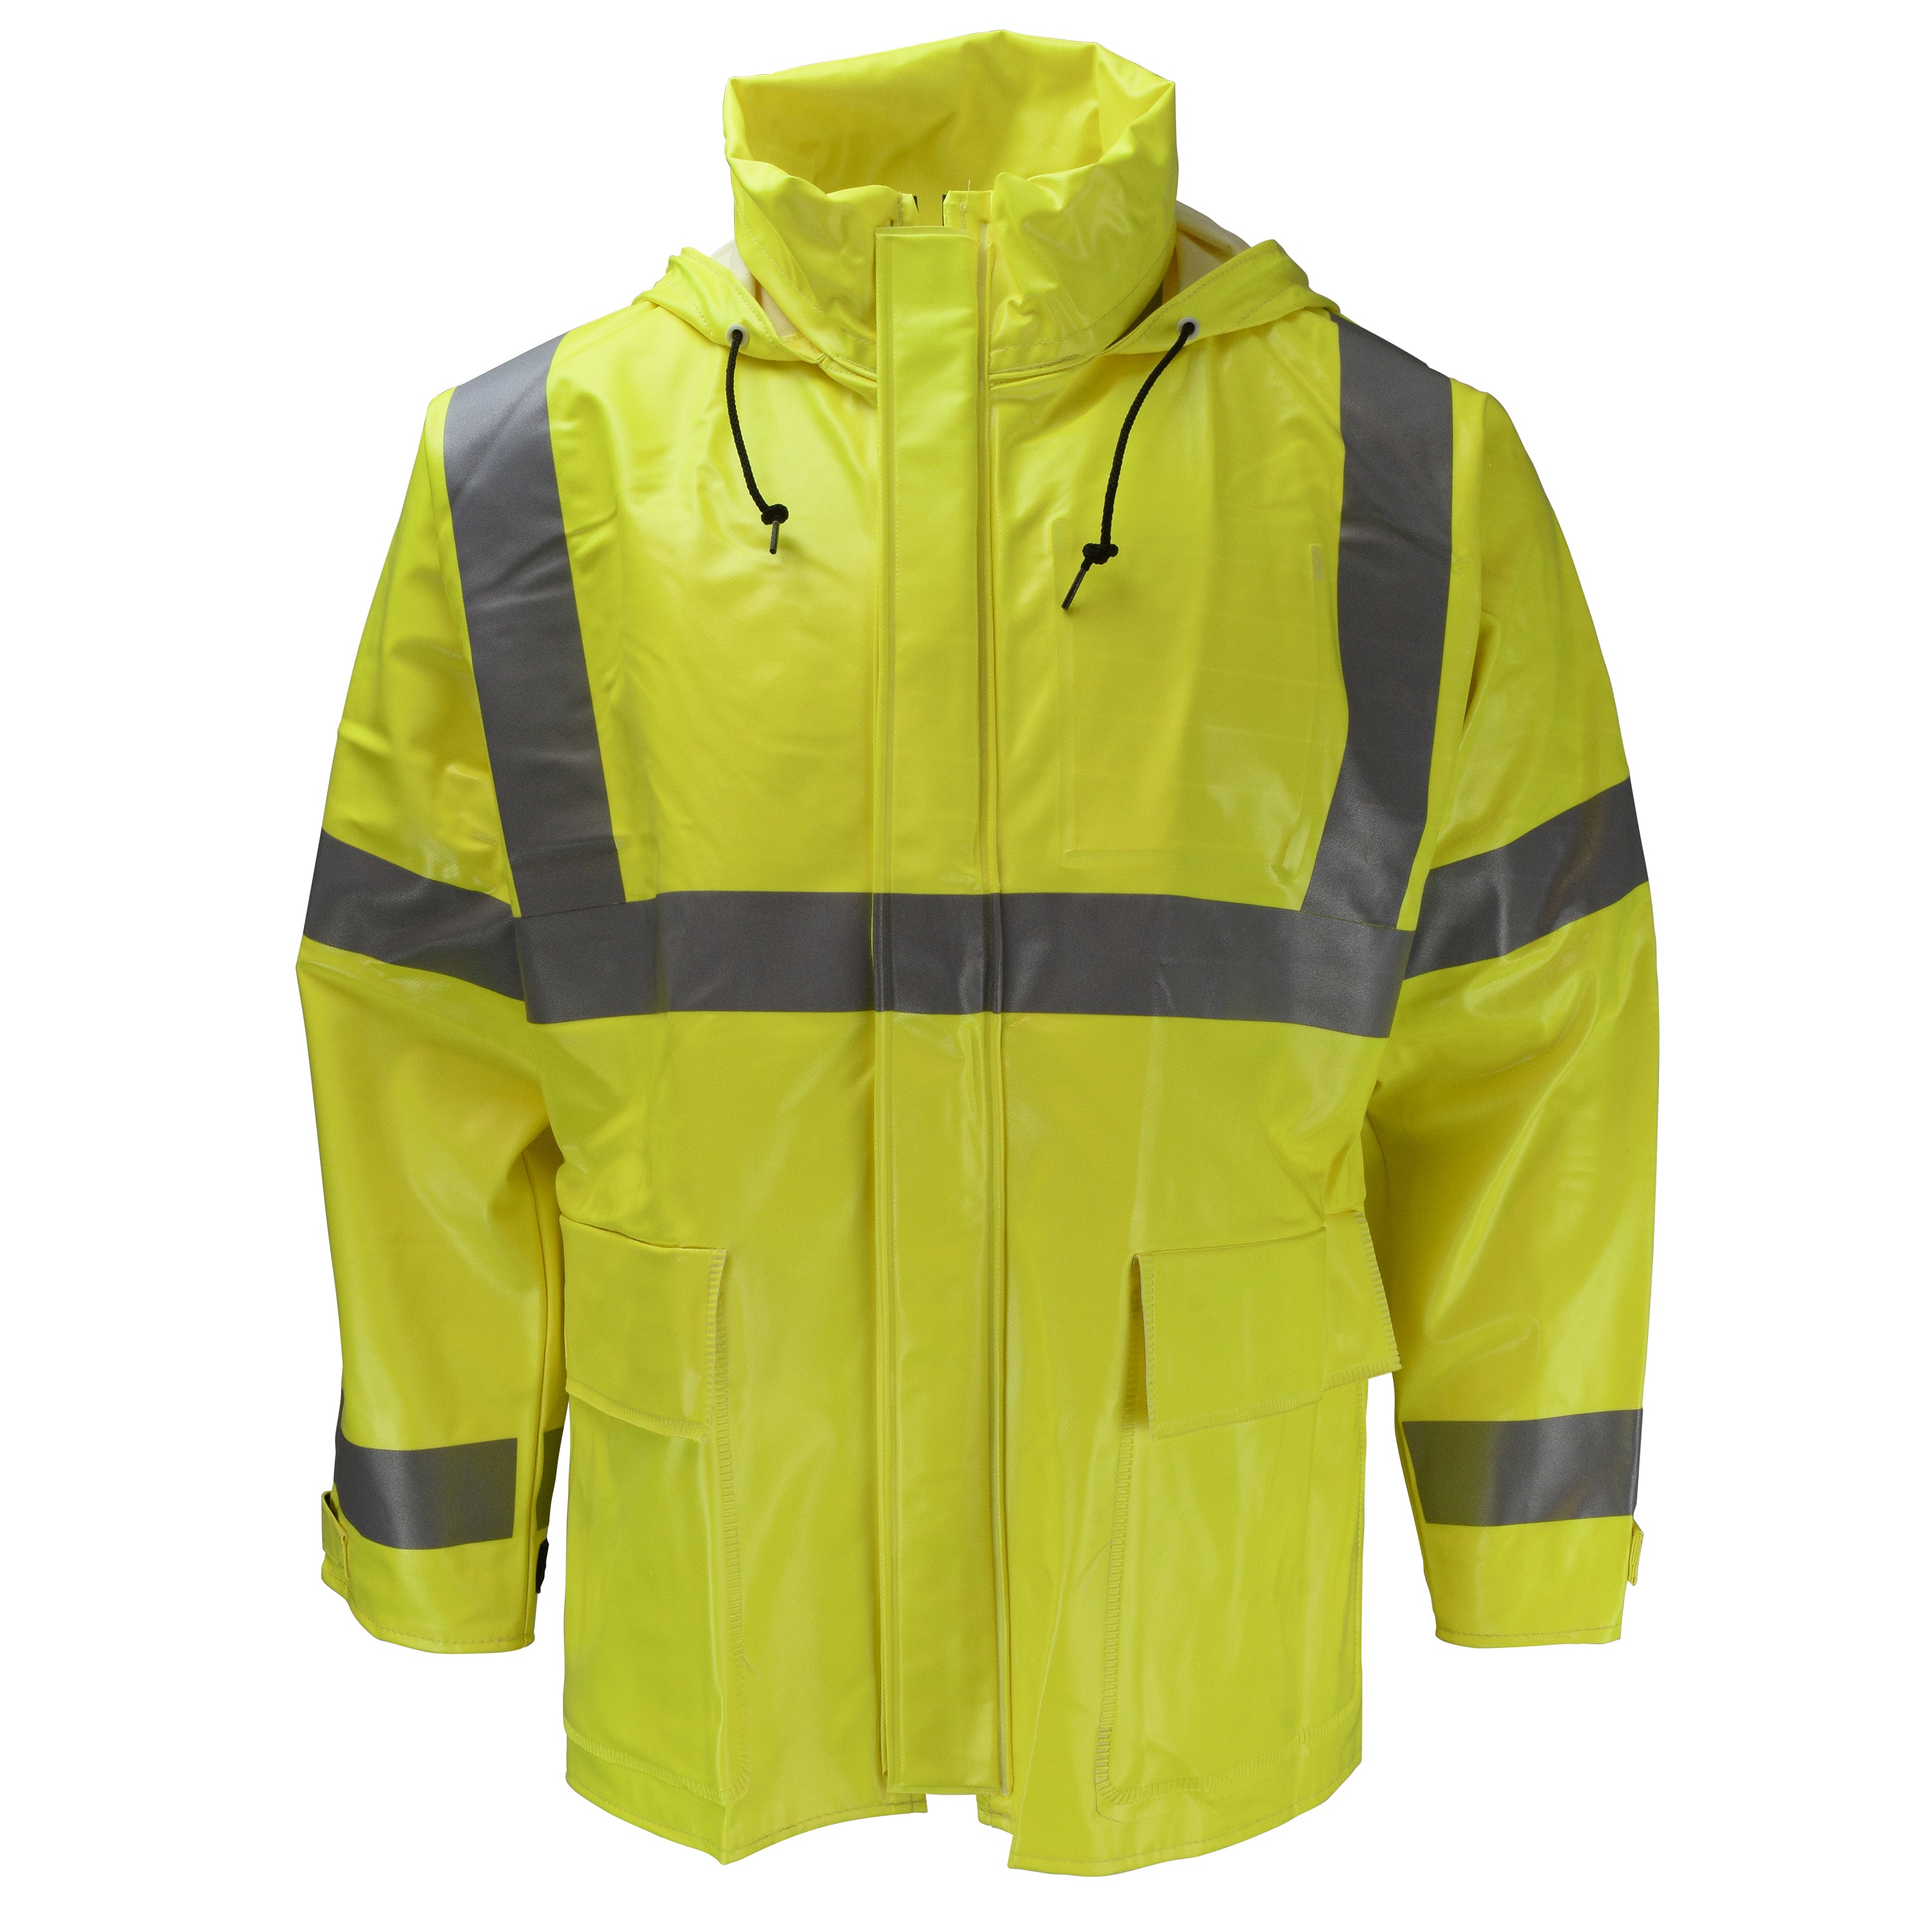 Neese 267AJ Dura Arc II Jacket with Attached Hood